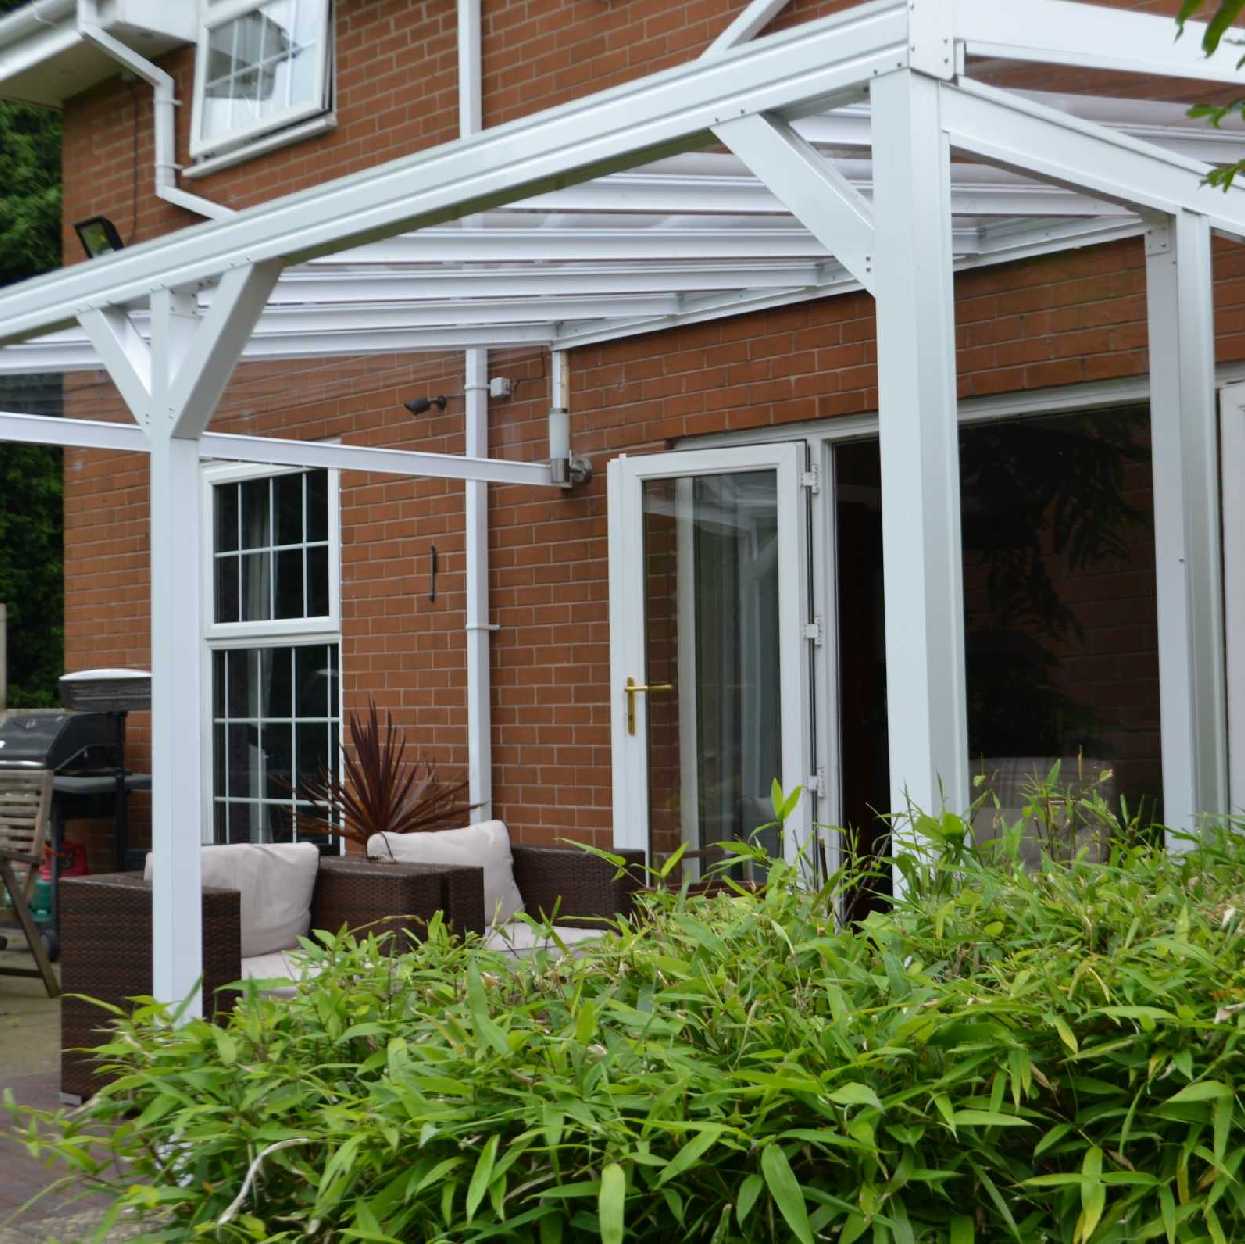 Omega Smart Lean-To Canopy, White with 6mm Glass Clear Plate Polycarbonate Glazing - 7.0m (W) x 3.5m (P), (4) Supporting Posts from Omega Build